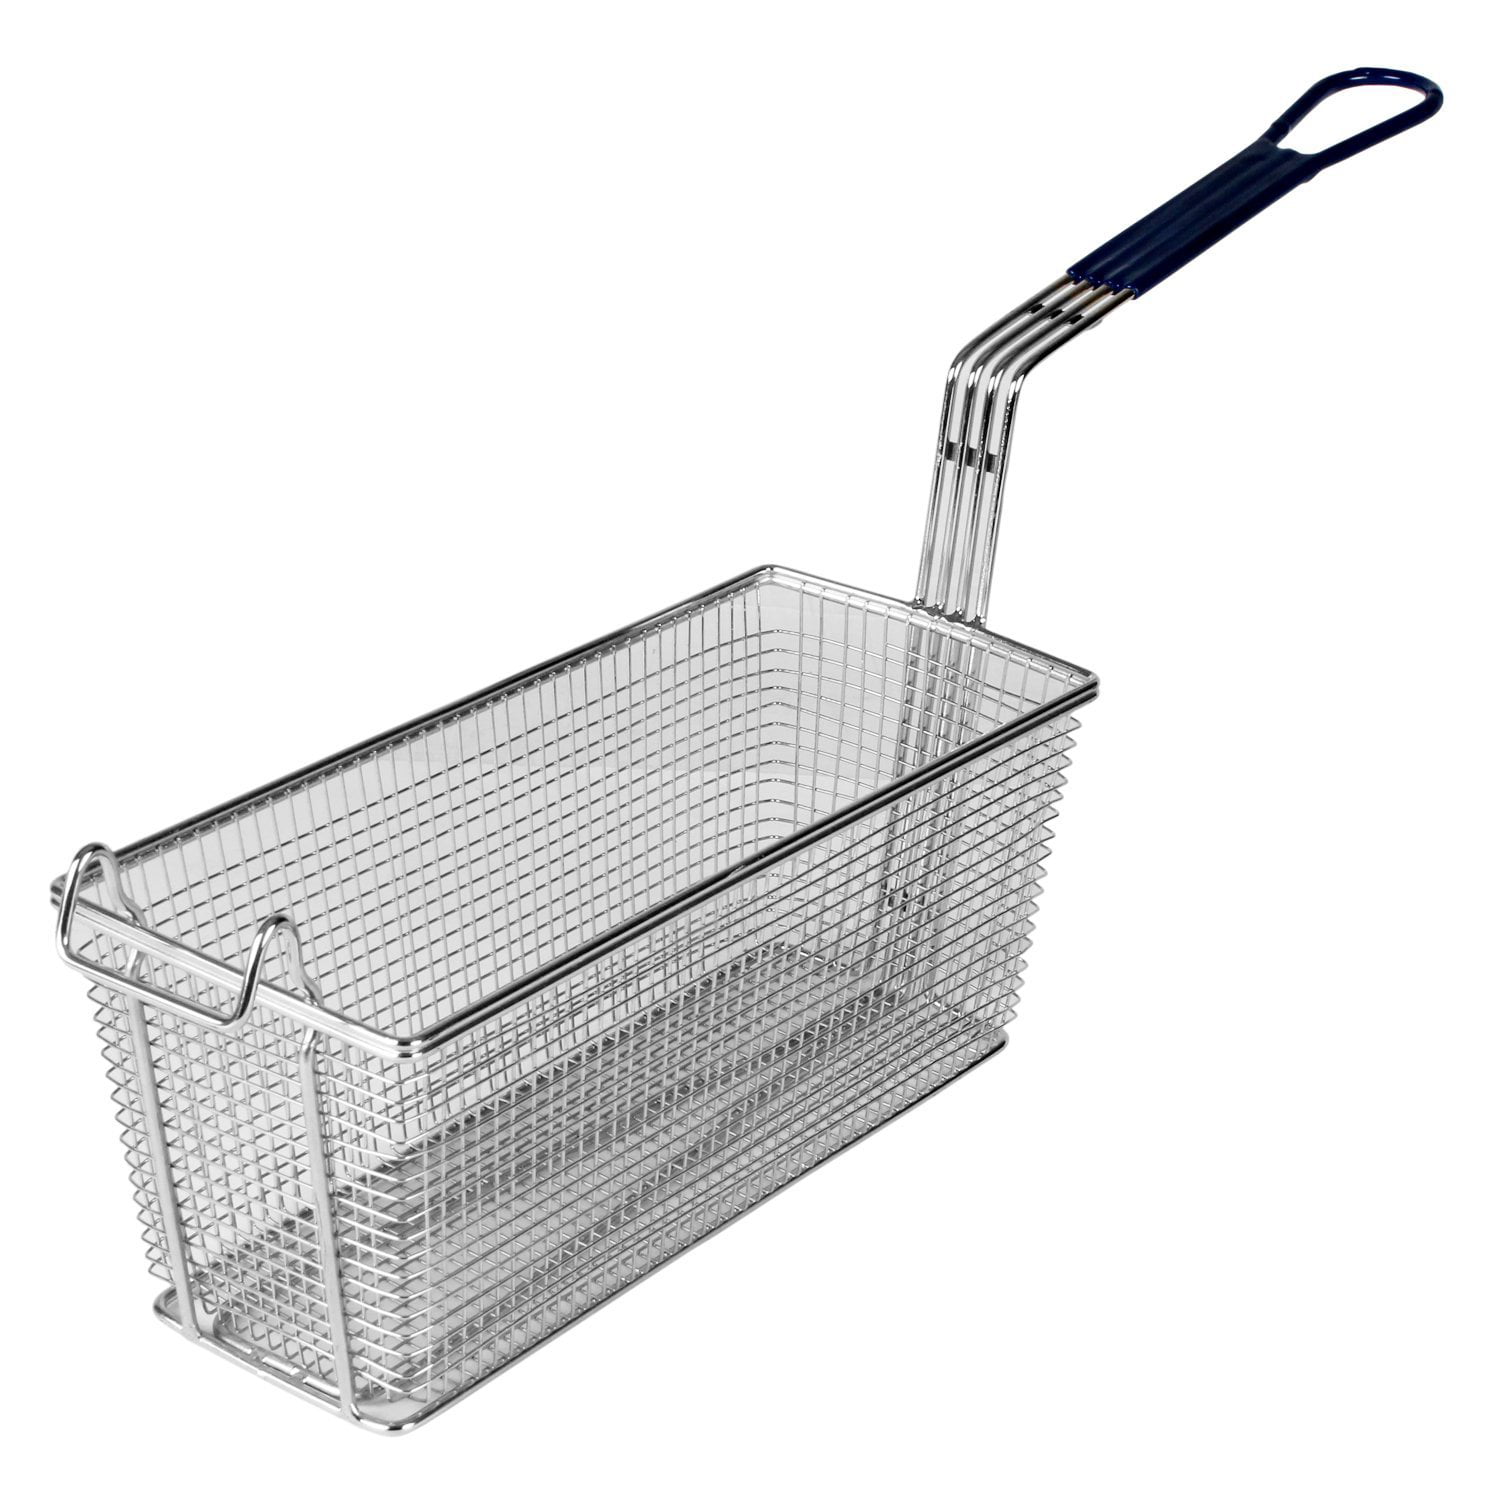 *NEW* Nickel Plated Mesh Fry Basket with Blue Handle Basket: 9" x 5.5" x 4" 